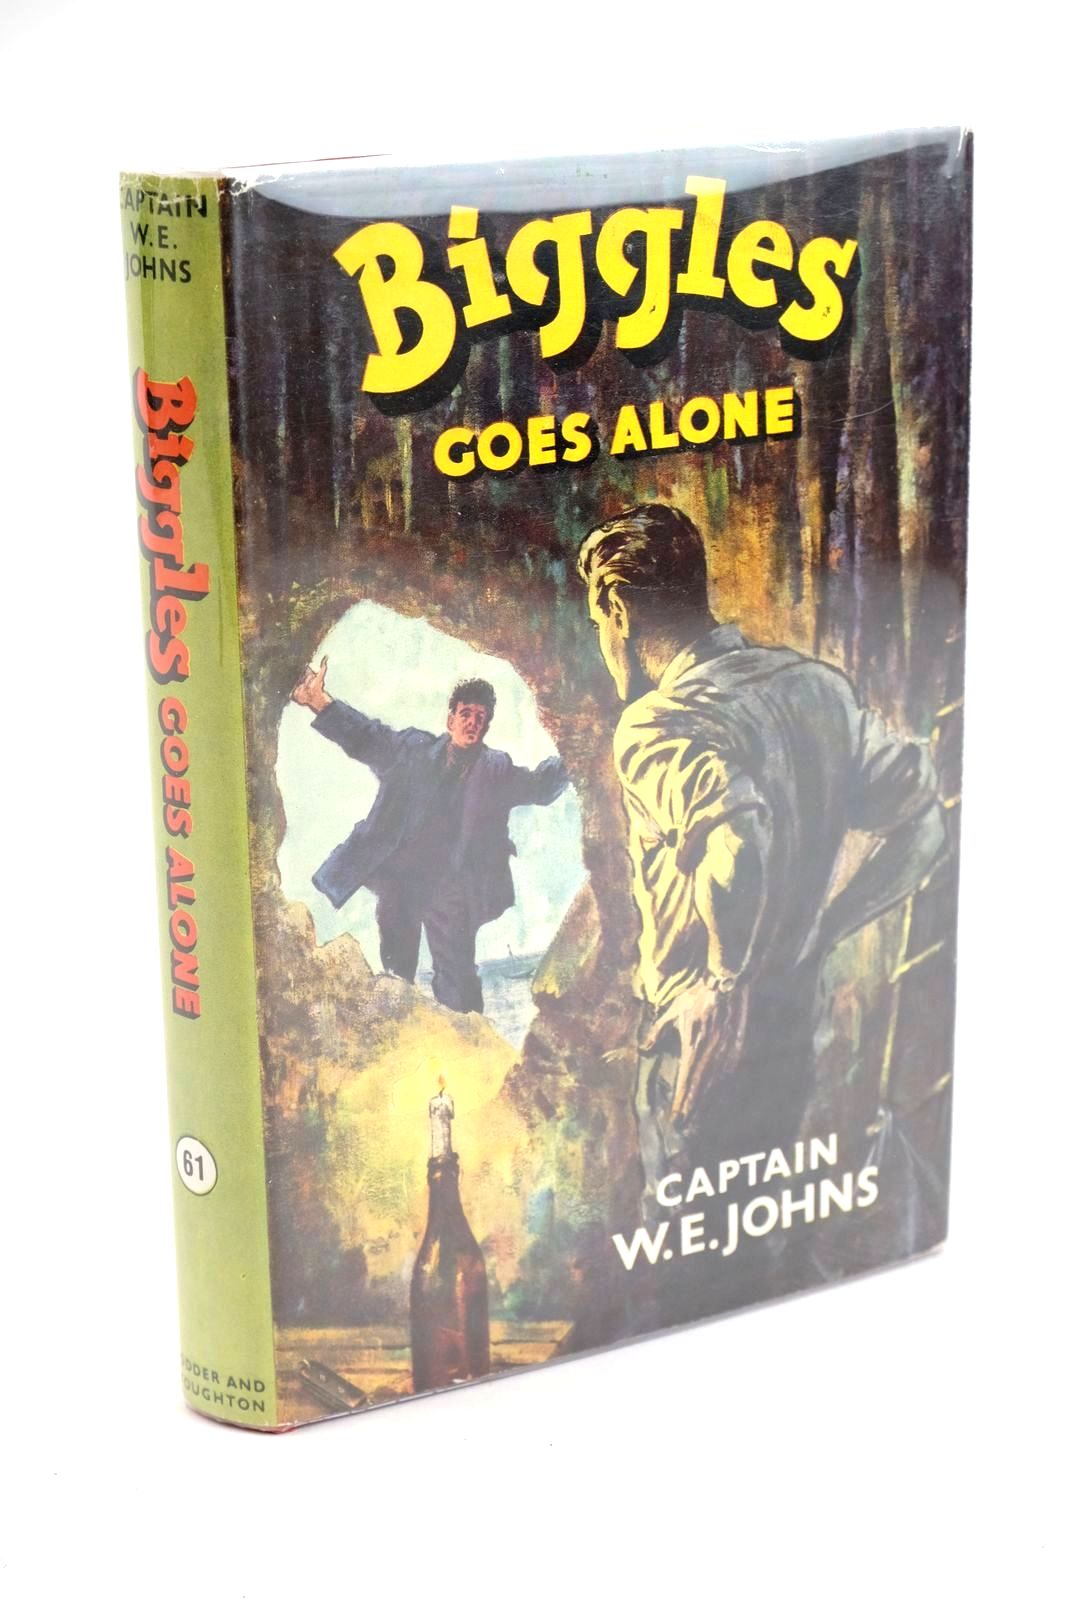 Photo of BIGGLES GOES ALONE written by Johns, W.E. illustrated by Stead,  published by Hodder & Stoughton (STOCK CODE: 1323433)  for sale by Stella & Rose's Books